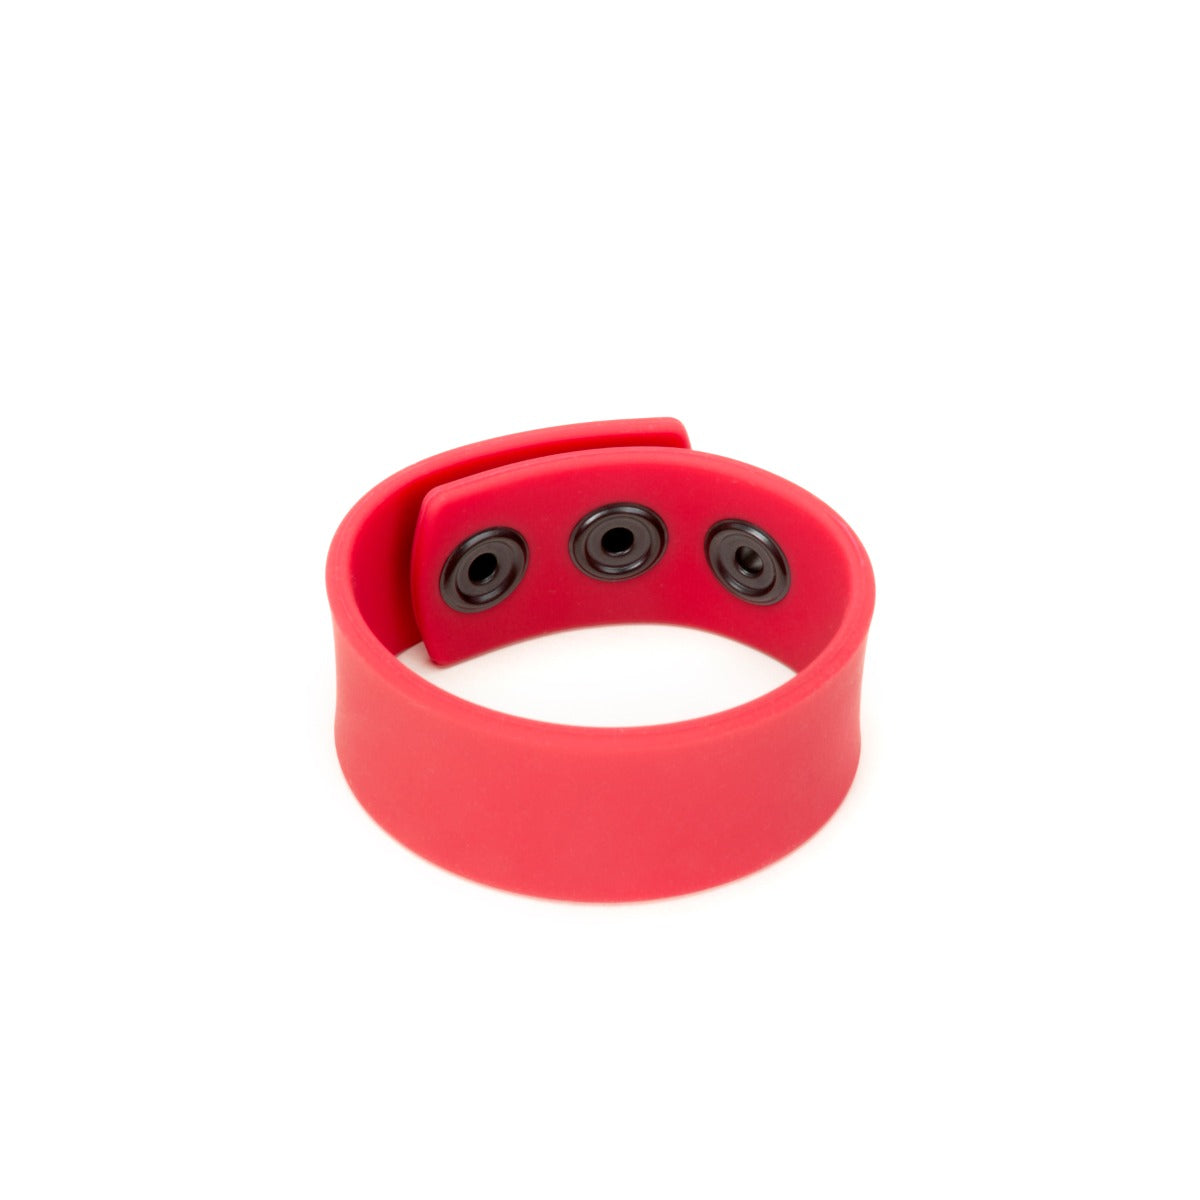 a red bracelet with two black buttons on it